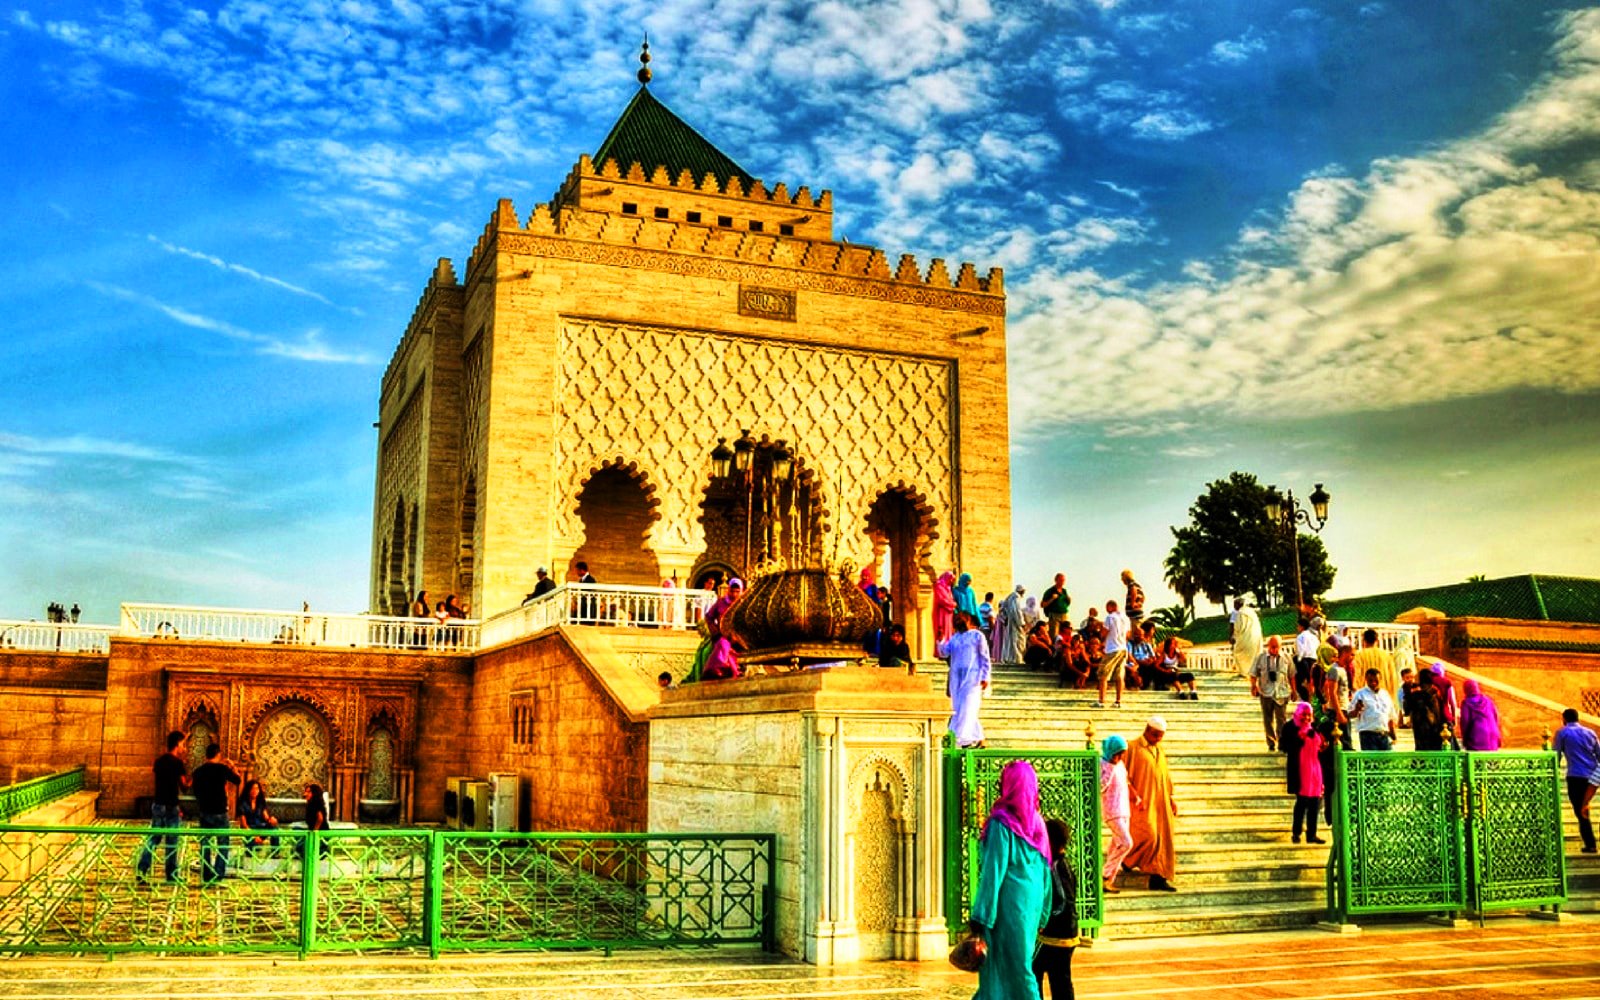 Imperial Cities Of Morocco Tour